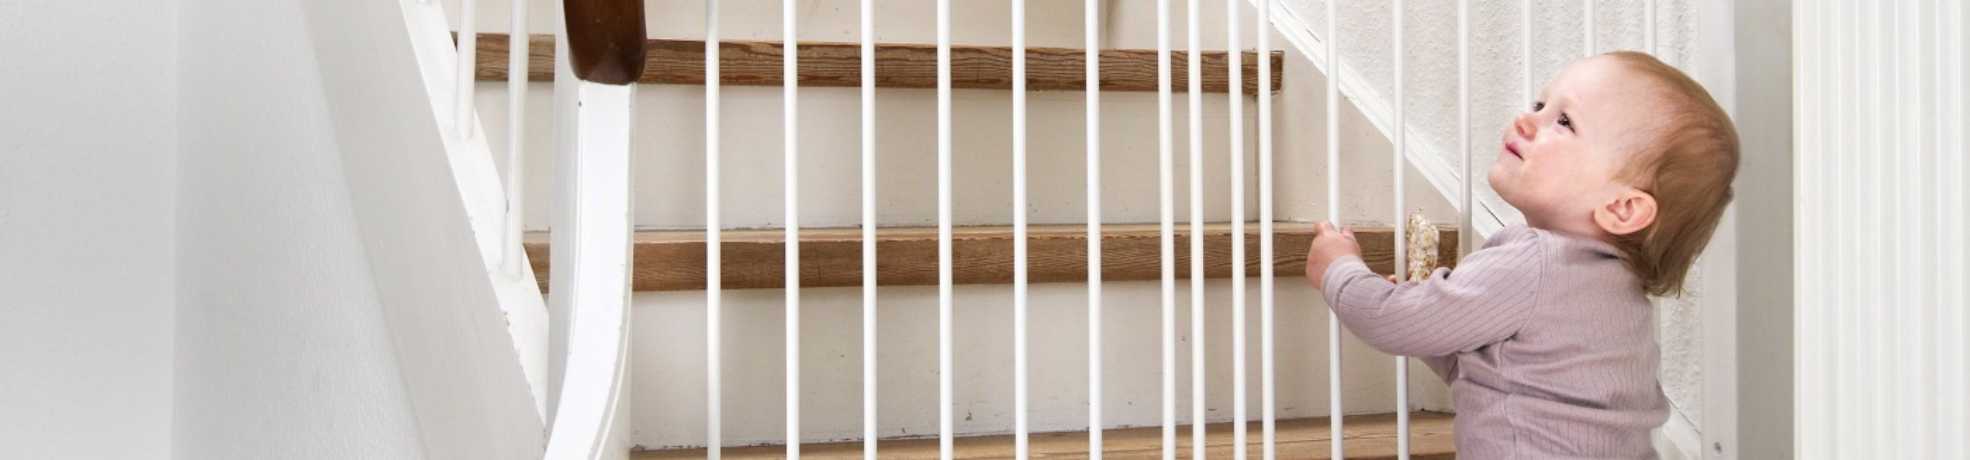 BabyDan flex fit gate in white as shown at the bottome of stairs